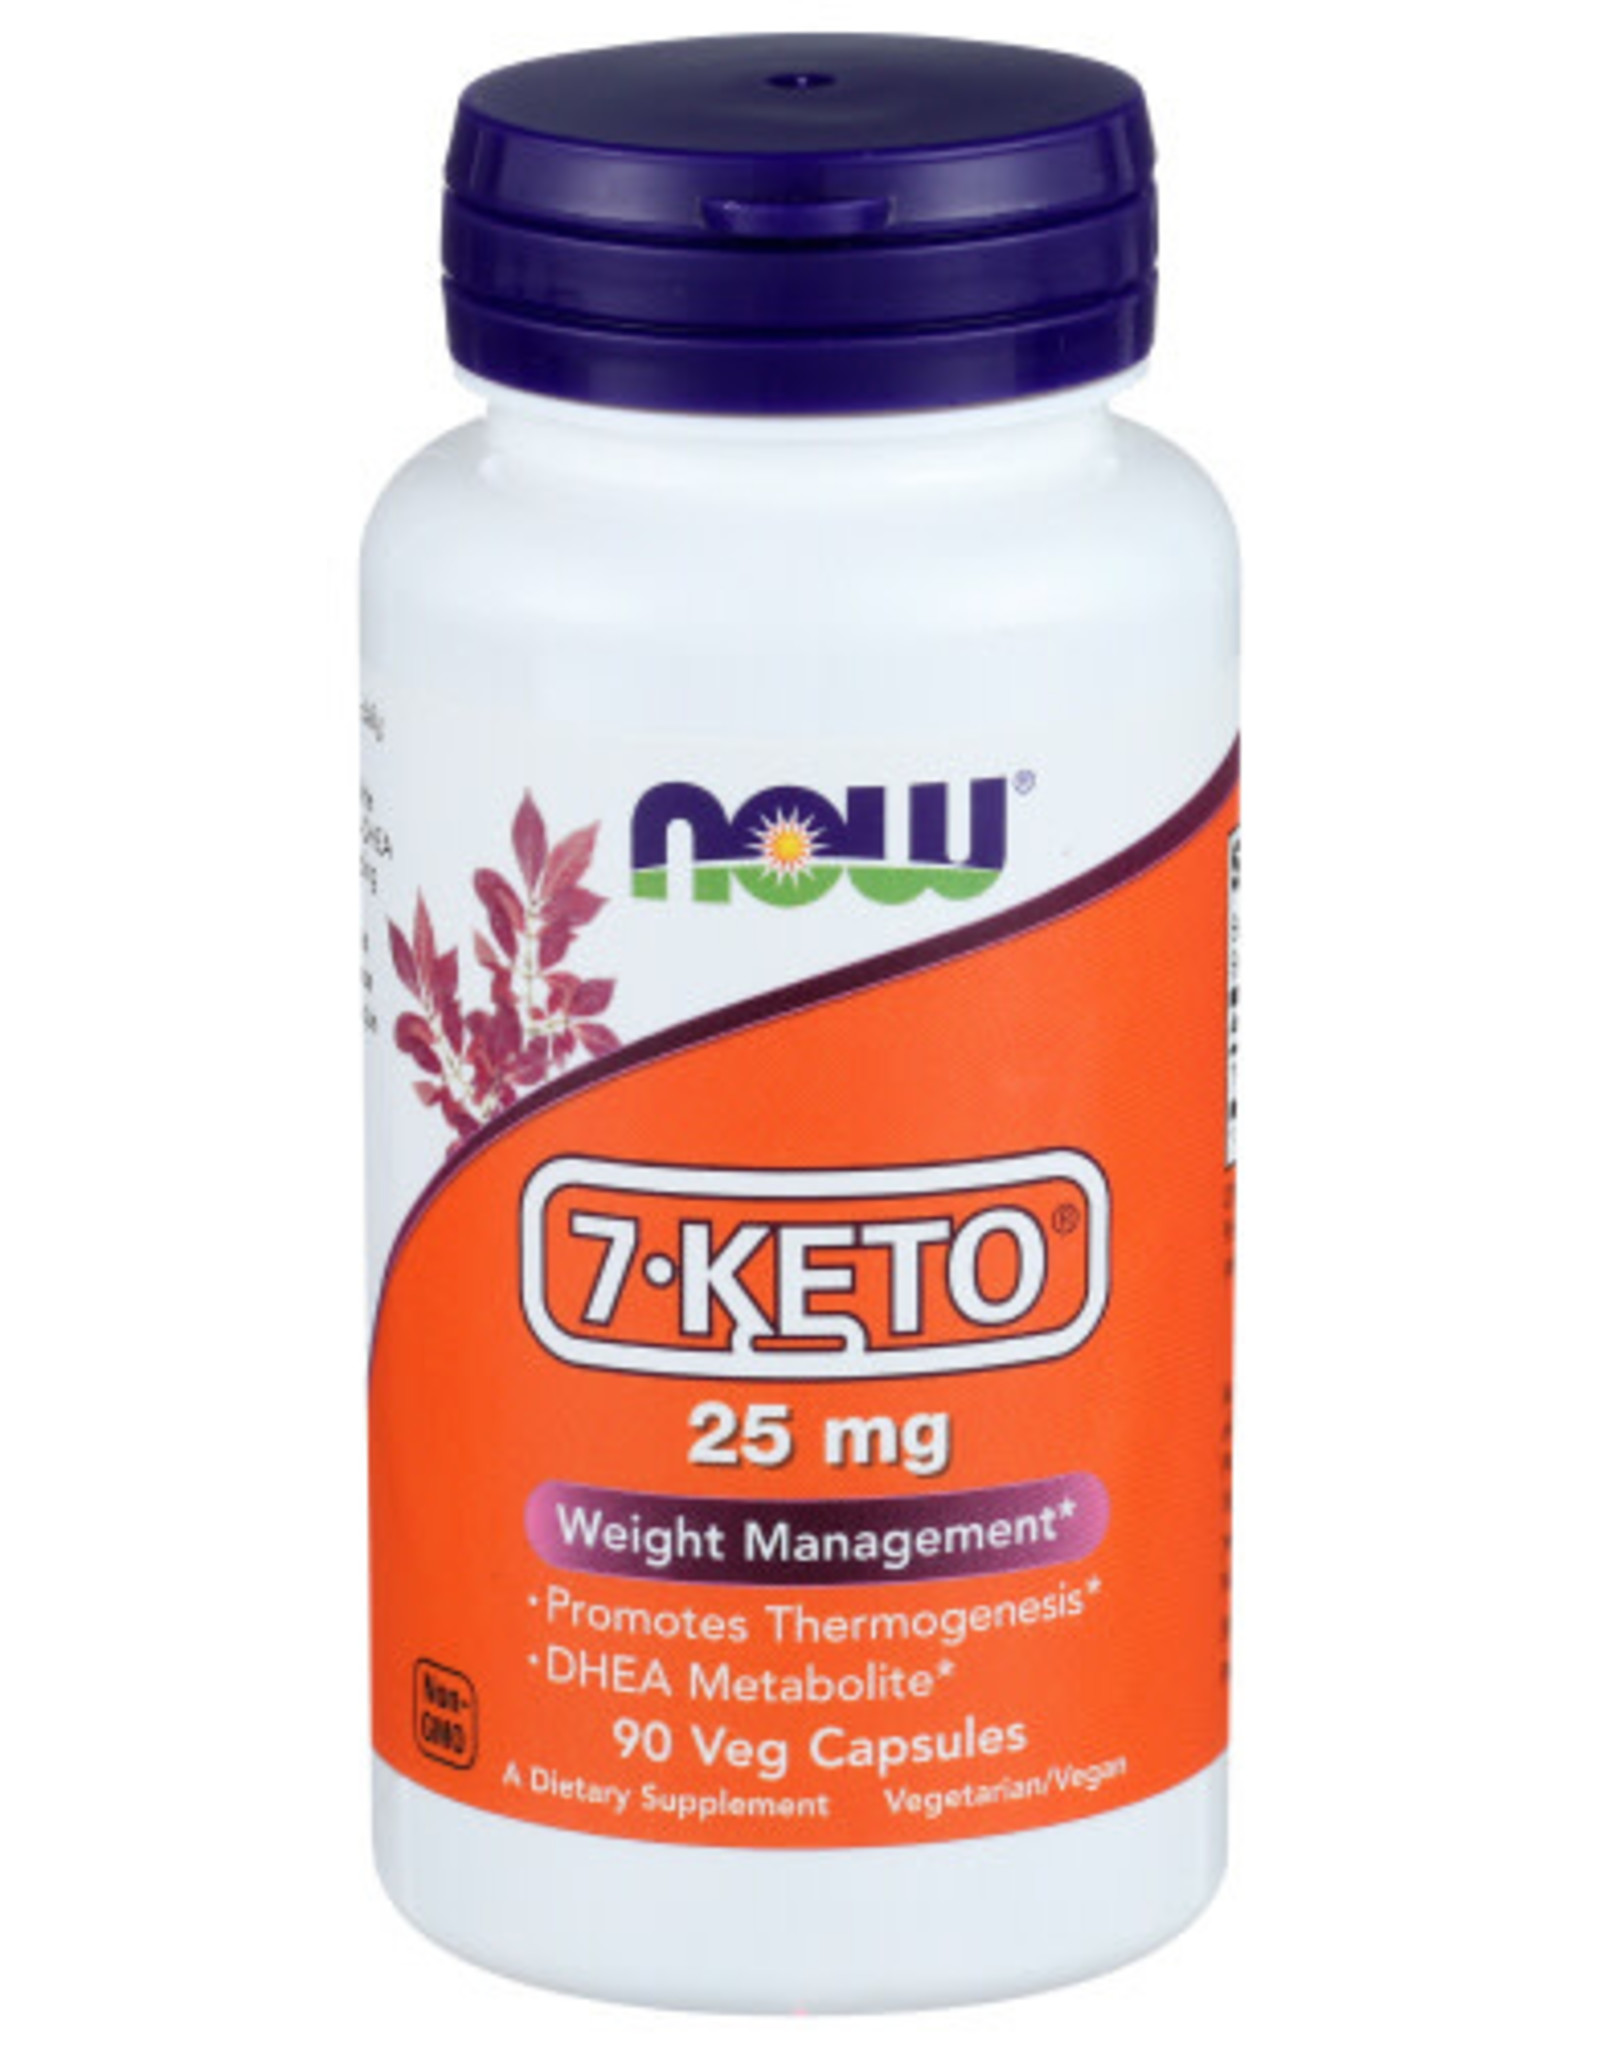 NOW FOODS NOW FOODS 7-KETO-DHEA DIETARY SUPPLEMENT, 90 CAPSULES